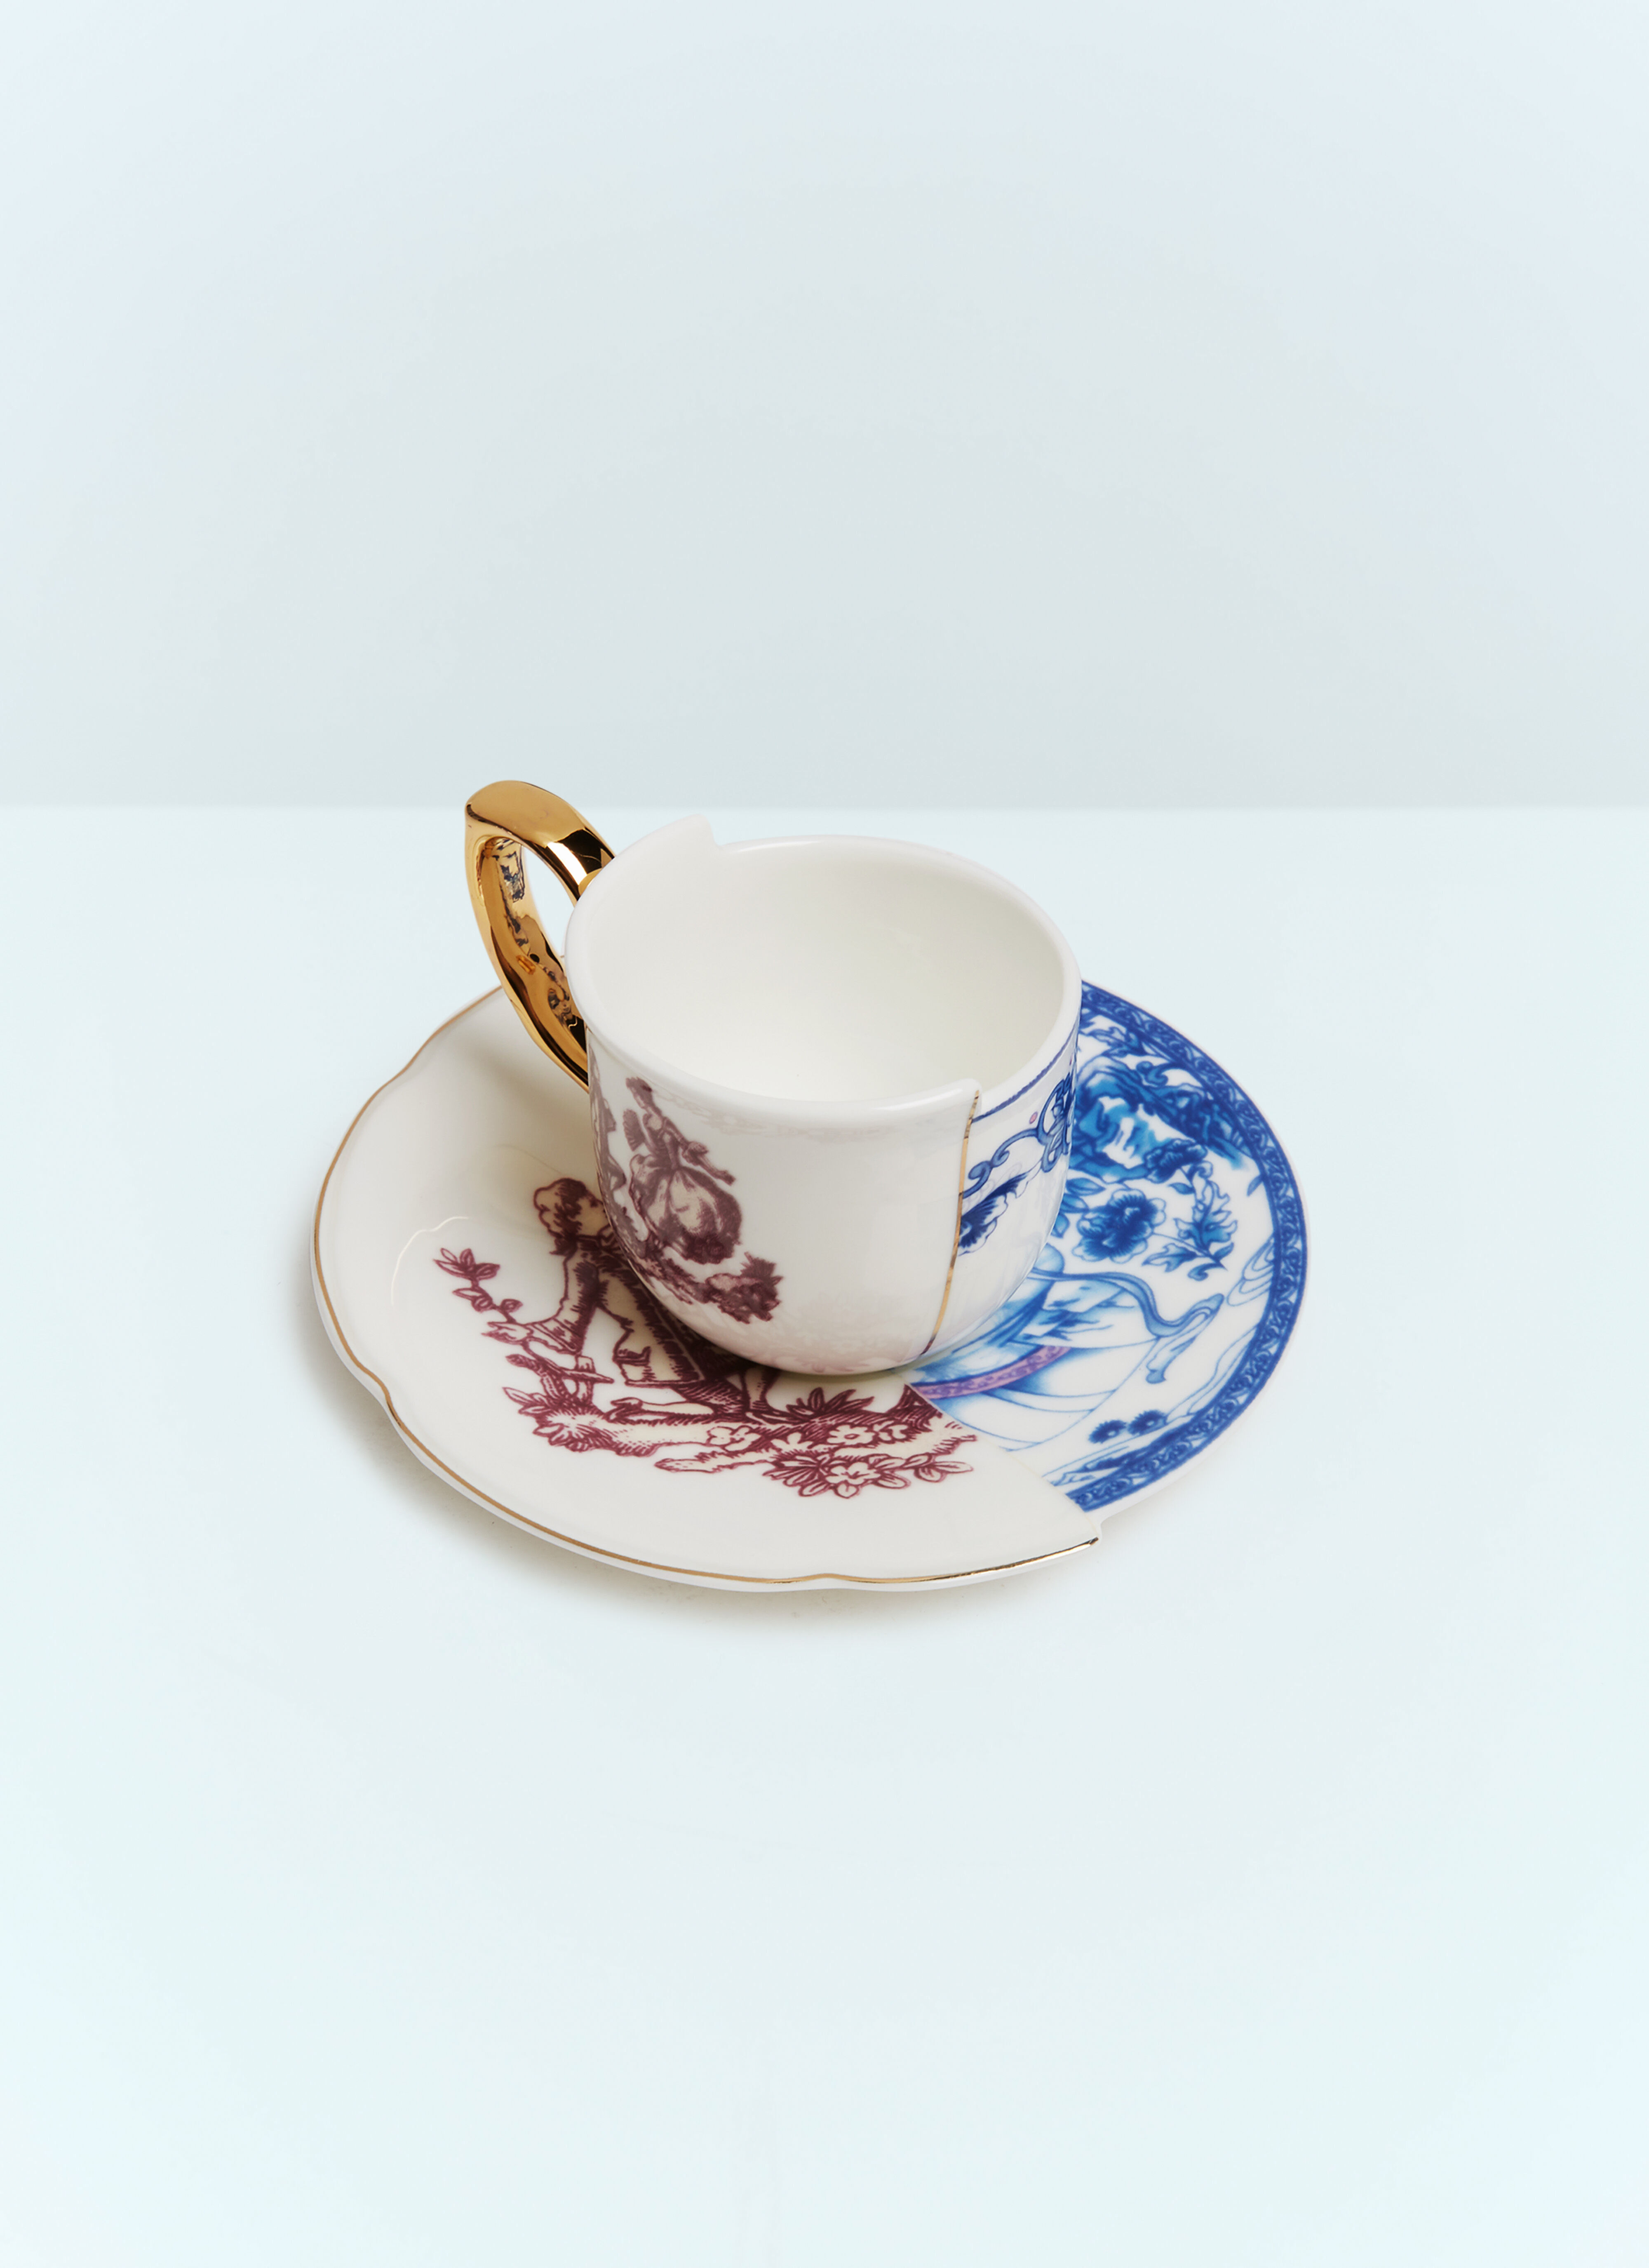 Polspotten Hybrid Eufemia Coffee Cup With Saucer Blue wps0691152